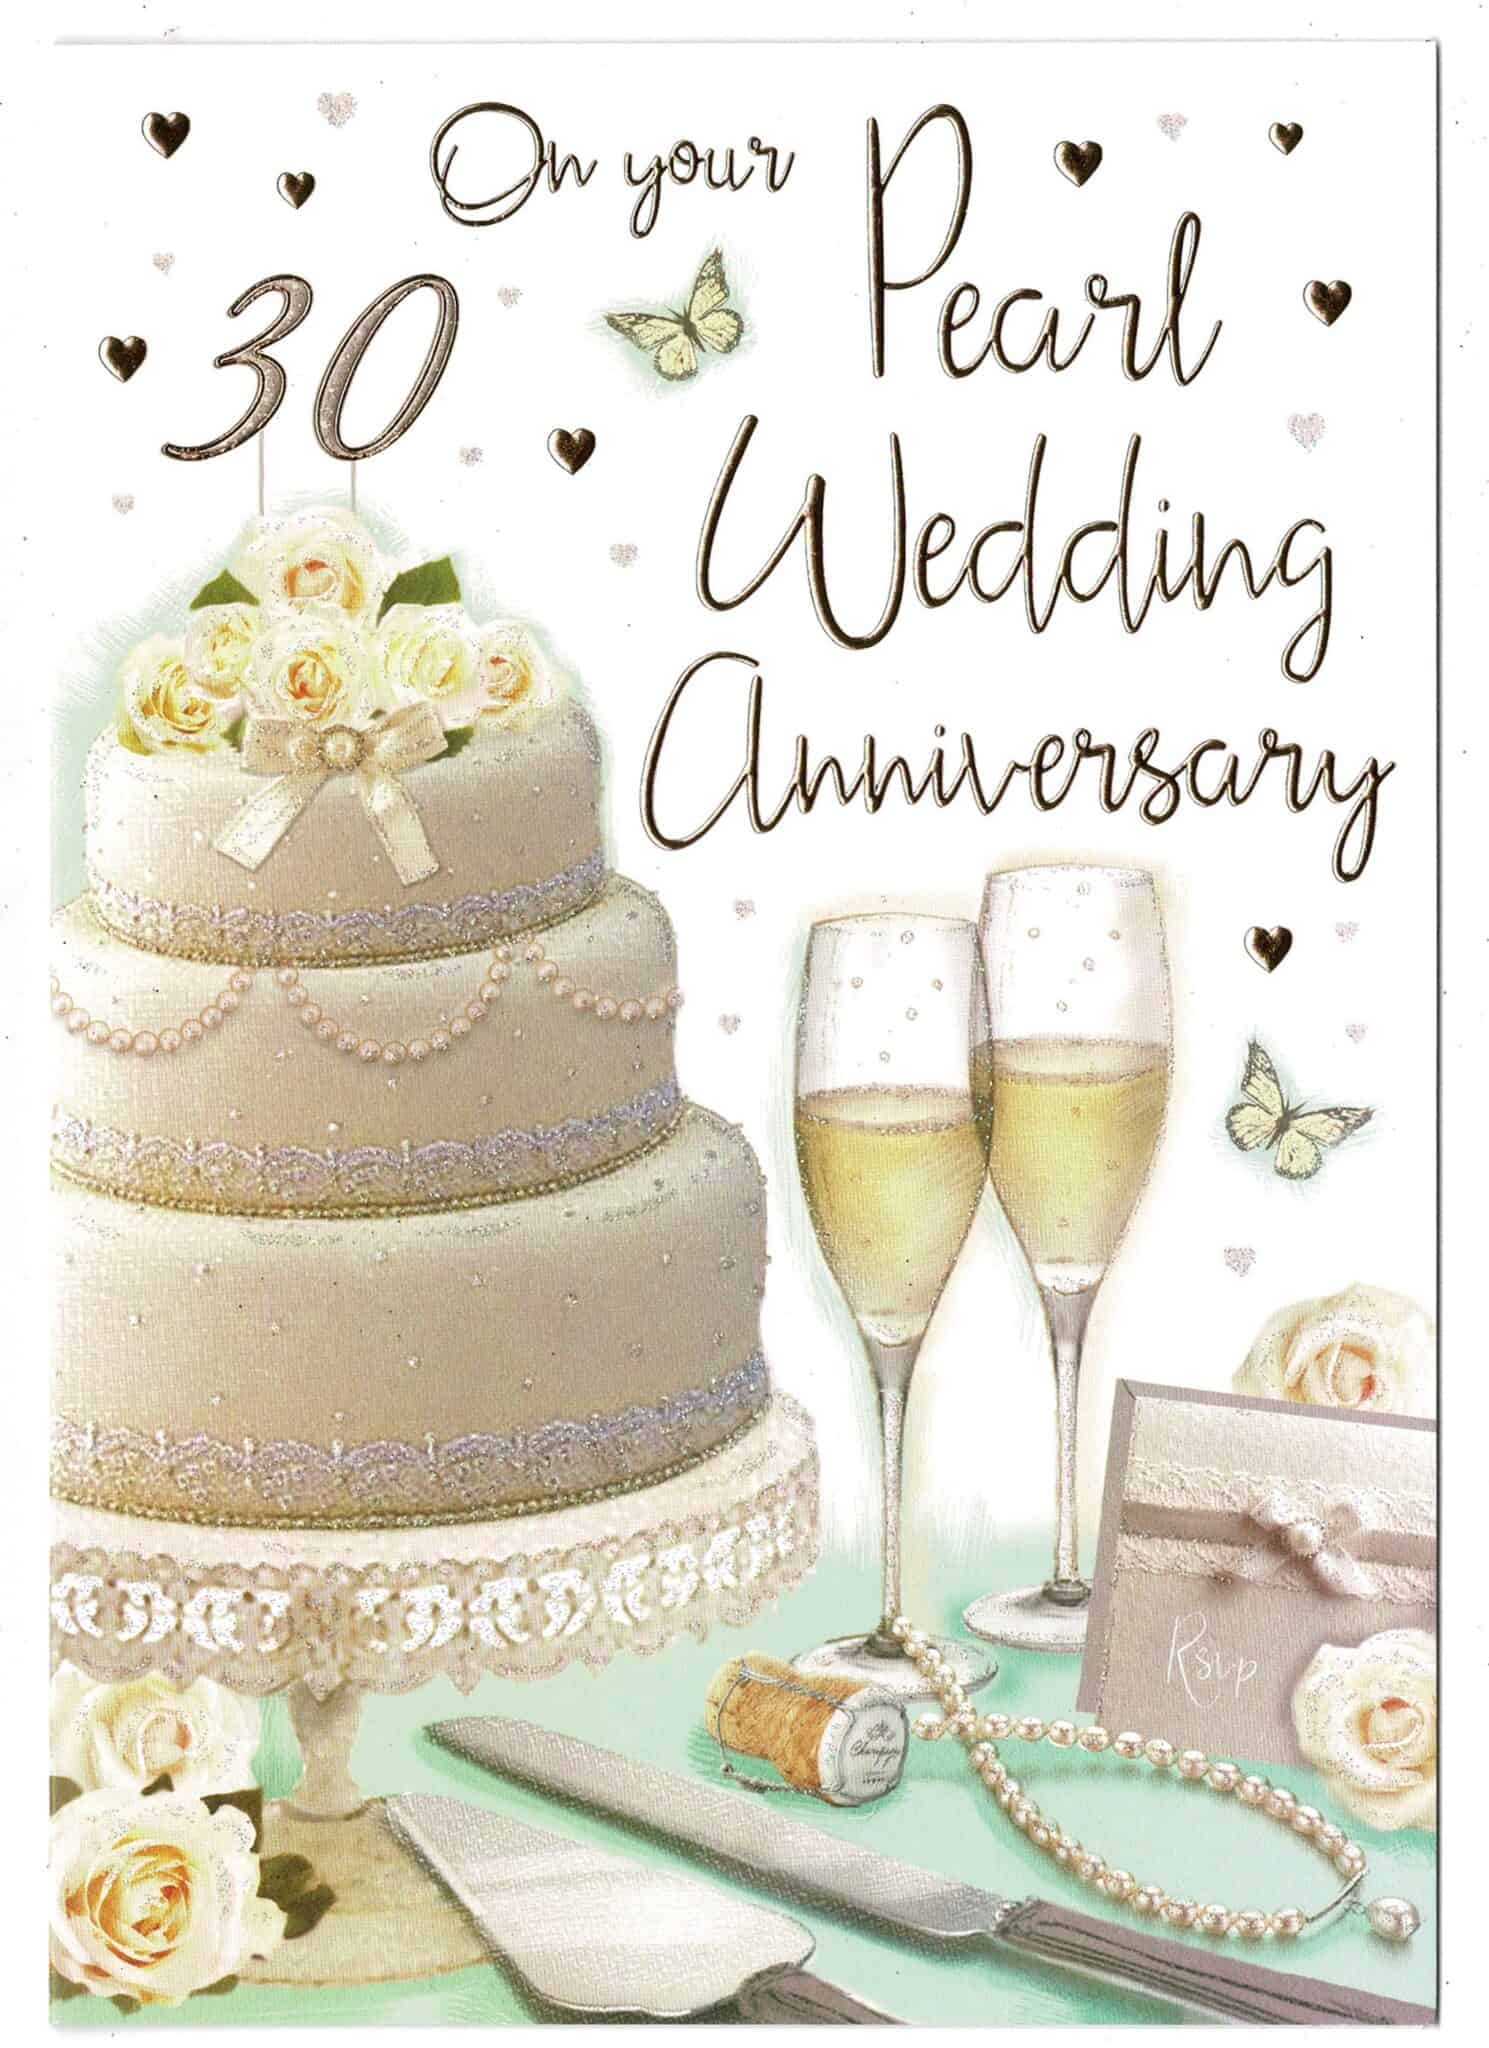 Pearl Anniversary Card ' On Your Pearl Wedding Anniversary' - With Love ...